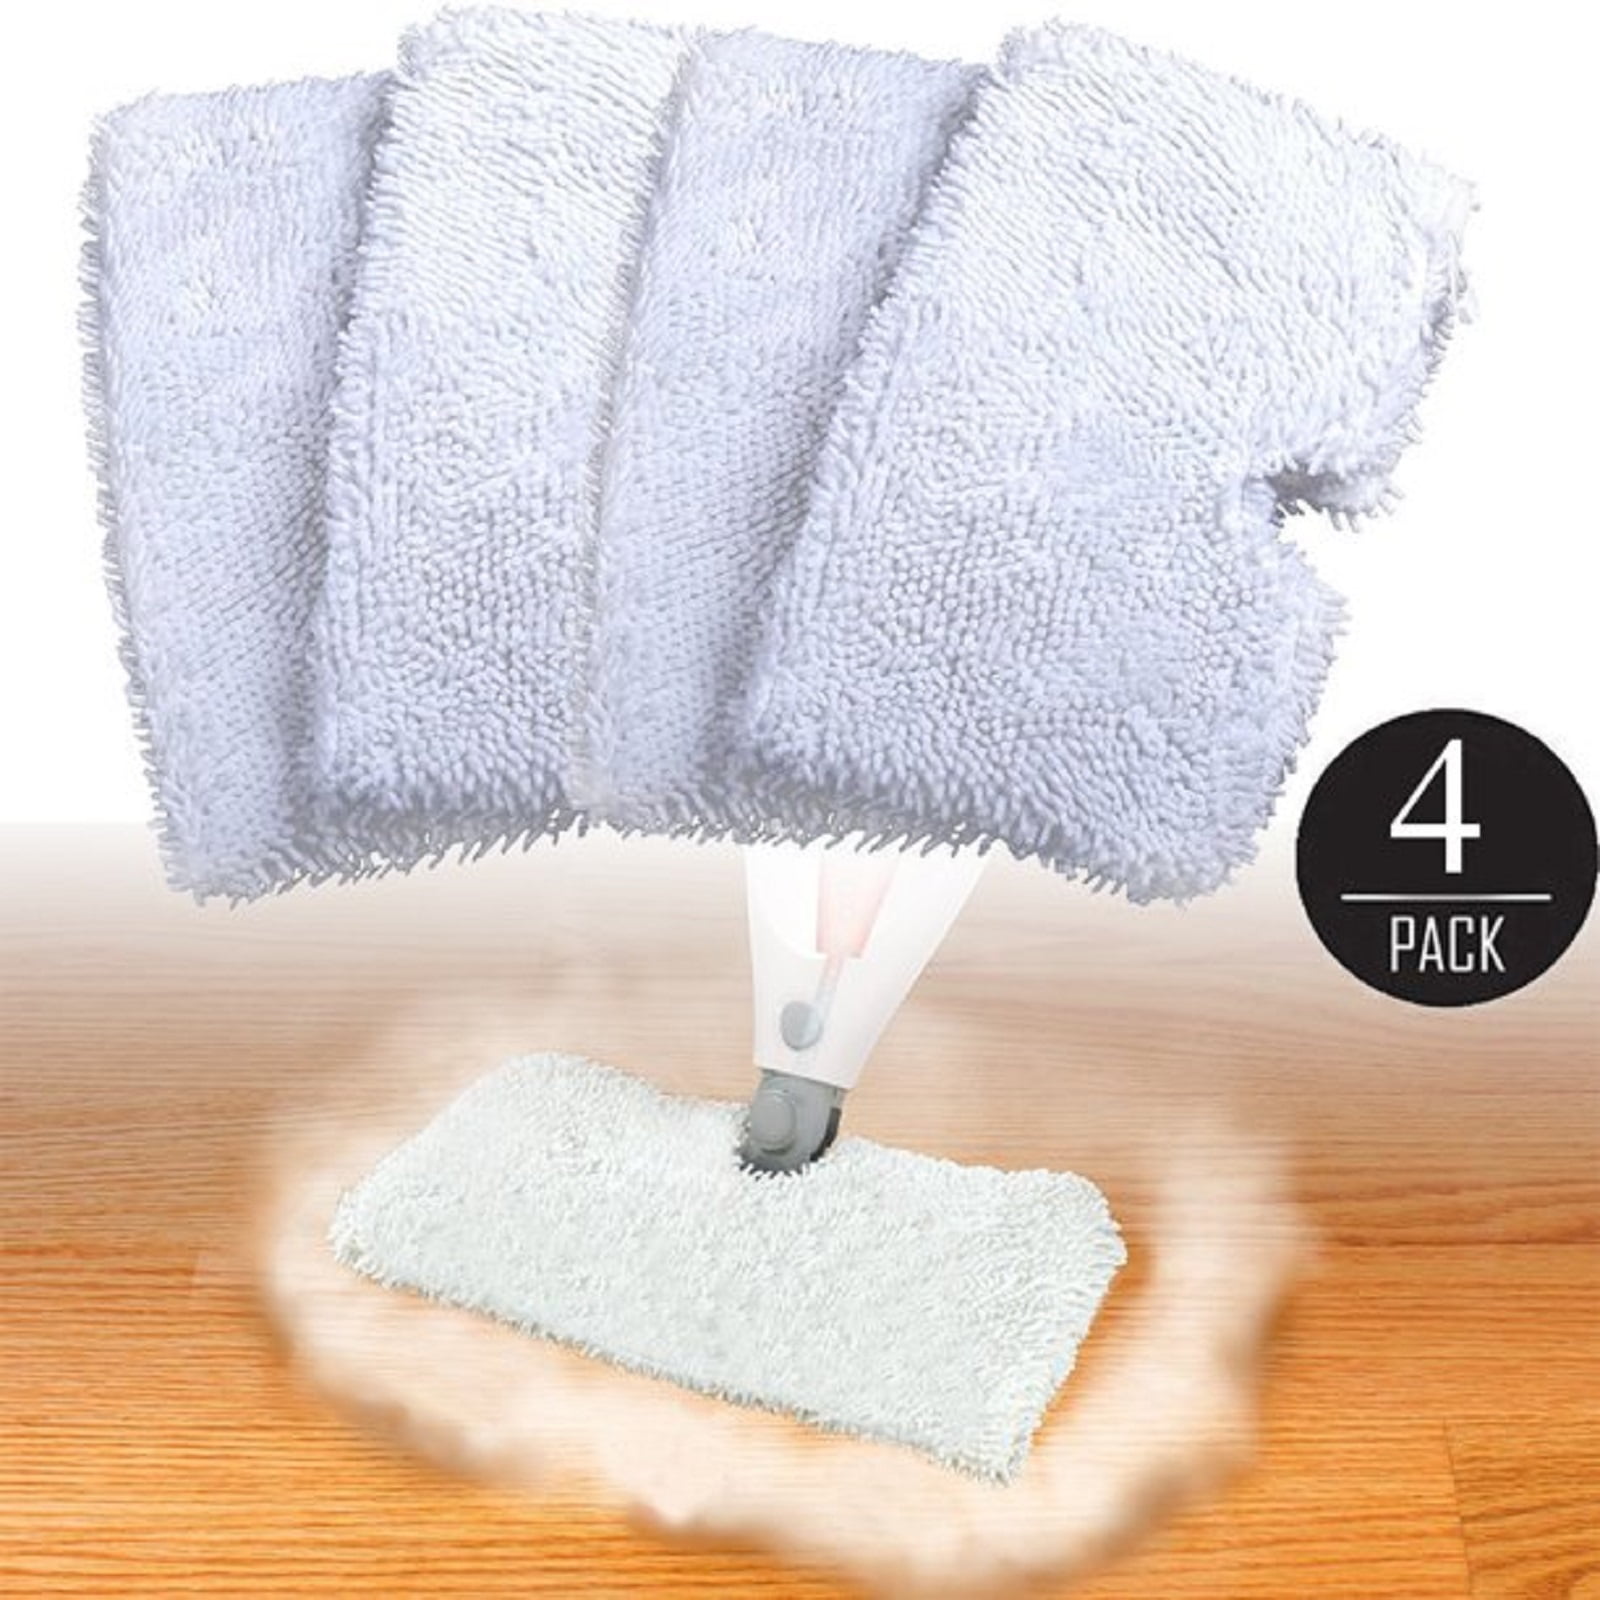 TSV 4 Pack Washable Microfiber Steam Mop Replacement Pads